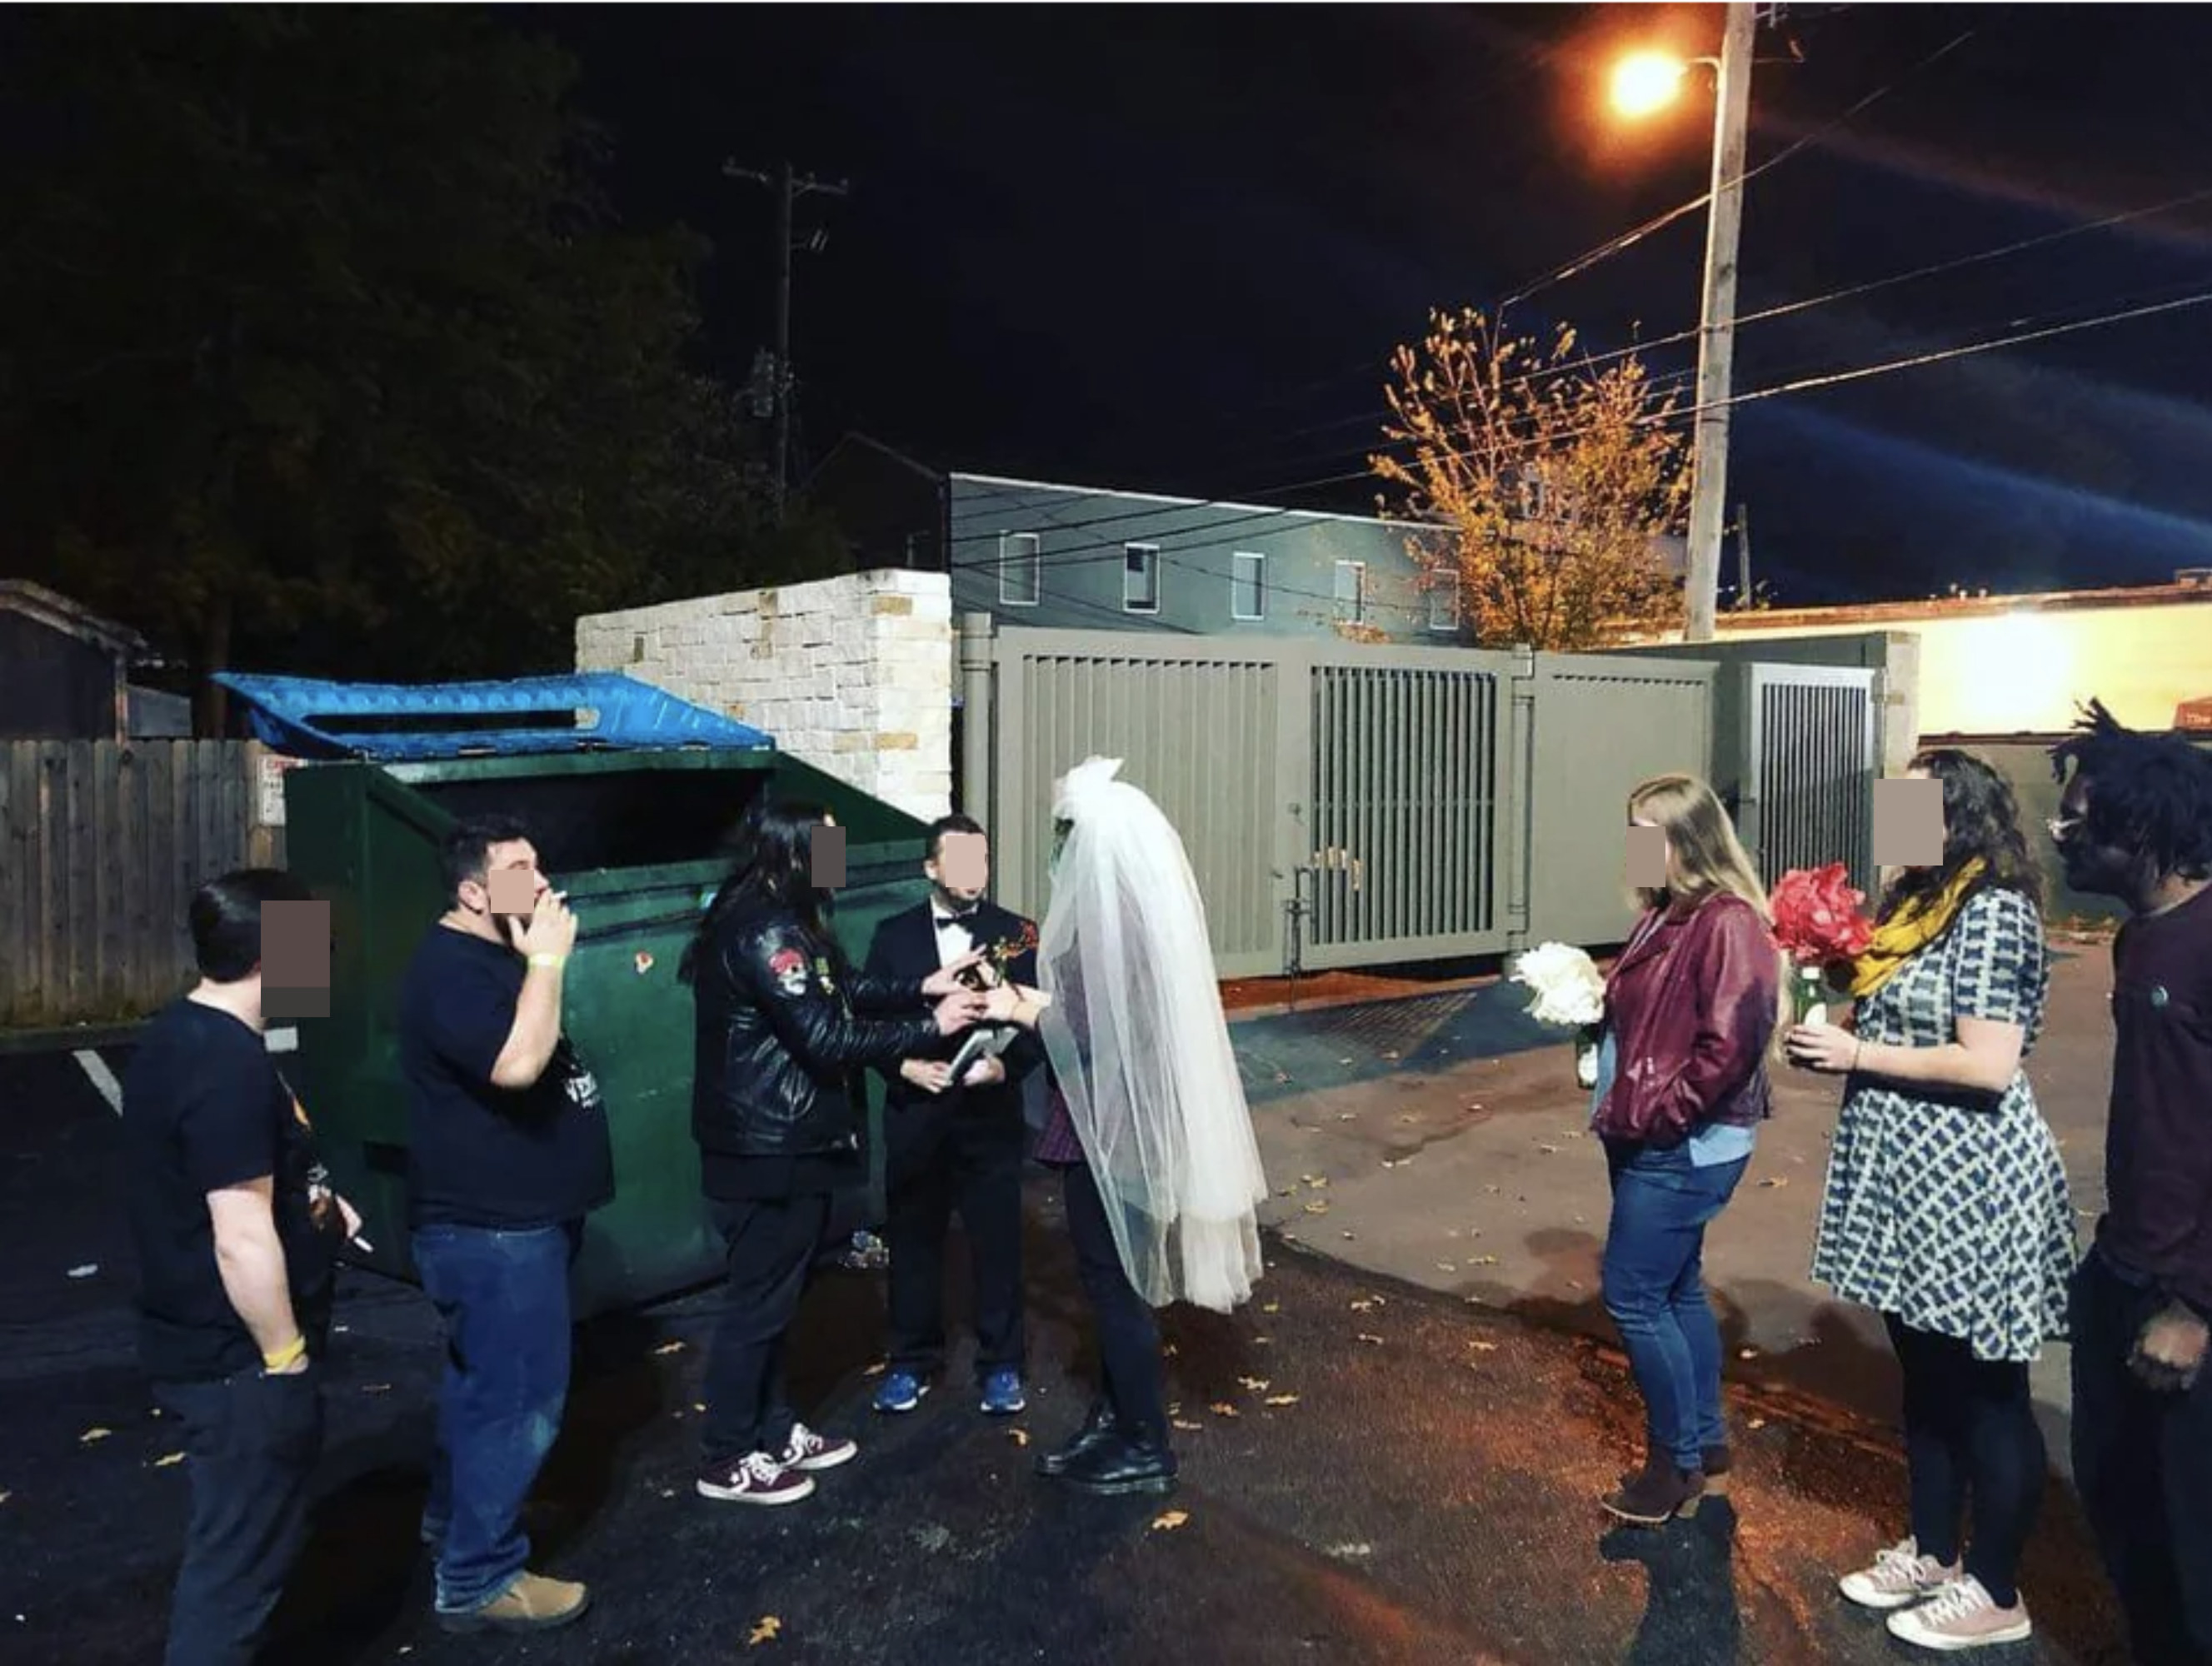 A wedding in an alley next to a dumpster